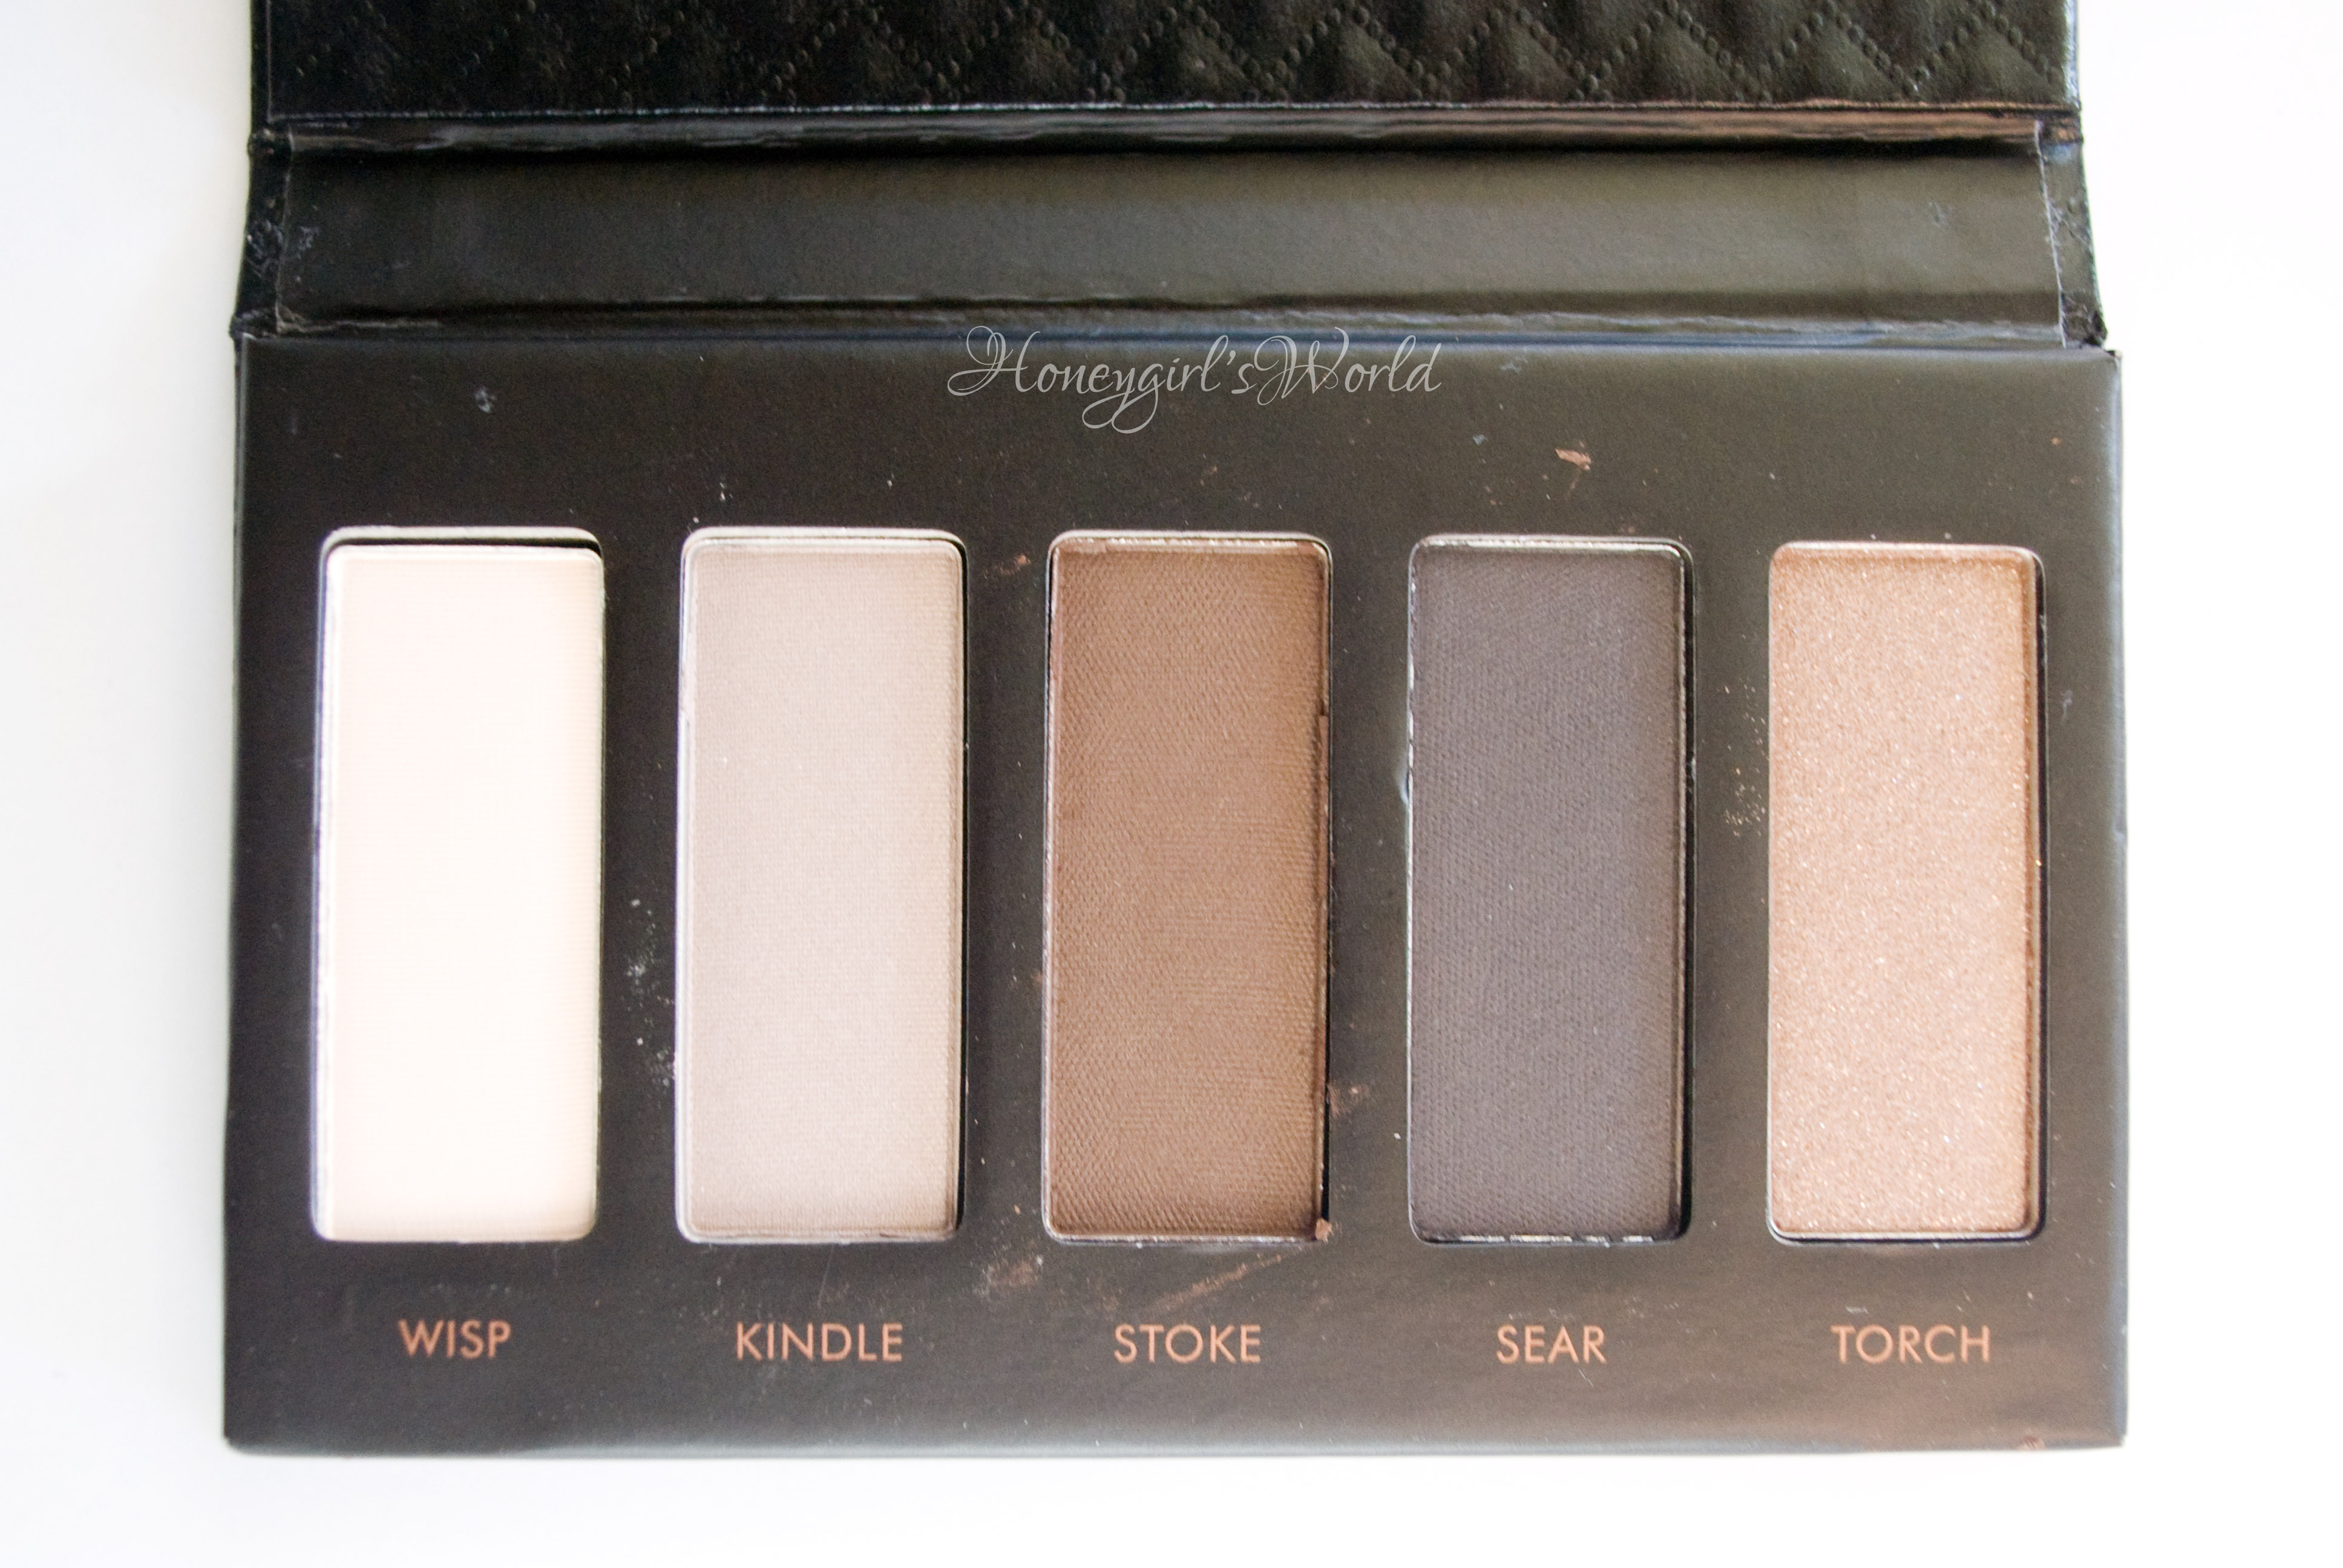 Borghese Eclissare Color Eclipse Five Shades of Torrid Eye Shadow Palette